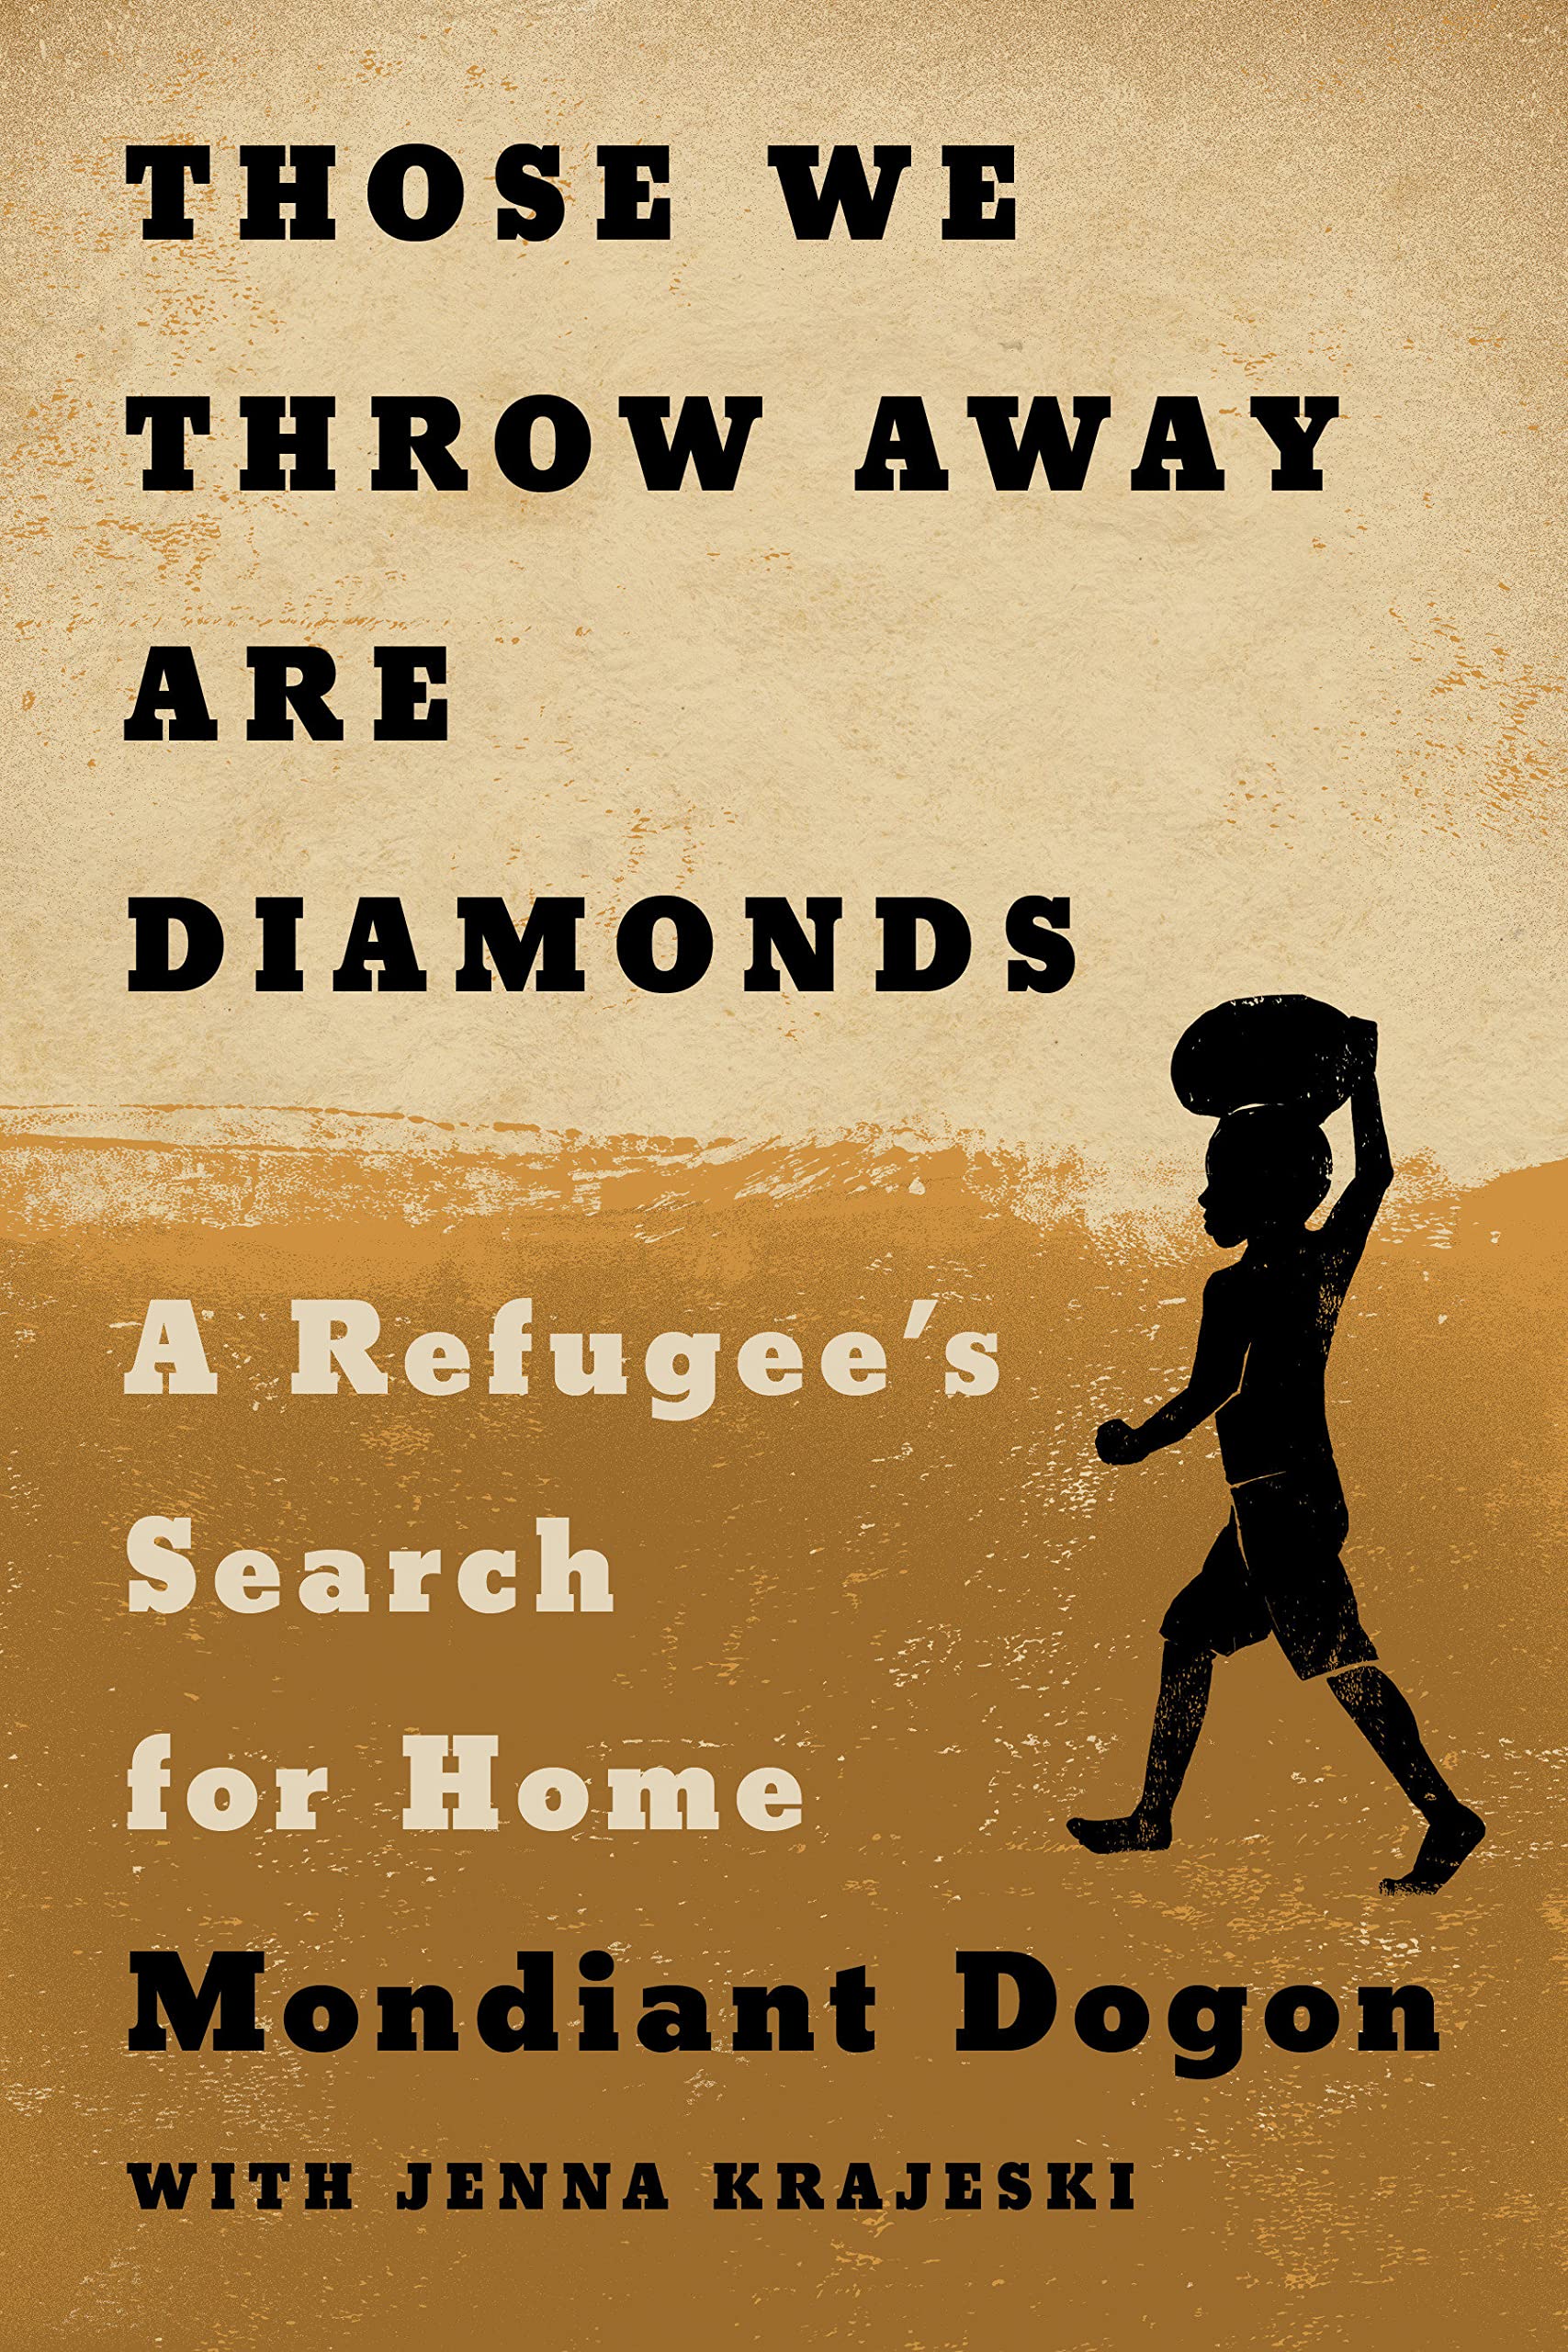 Those We Throw Away Are Diamonds: A Refugee's Search for Home Hardcover by Mondiant Dogon, Jenna Krajeski